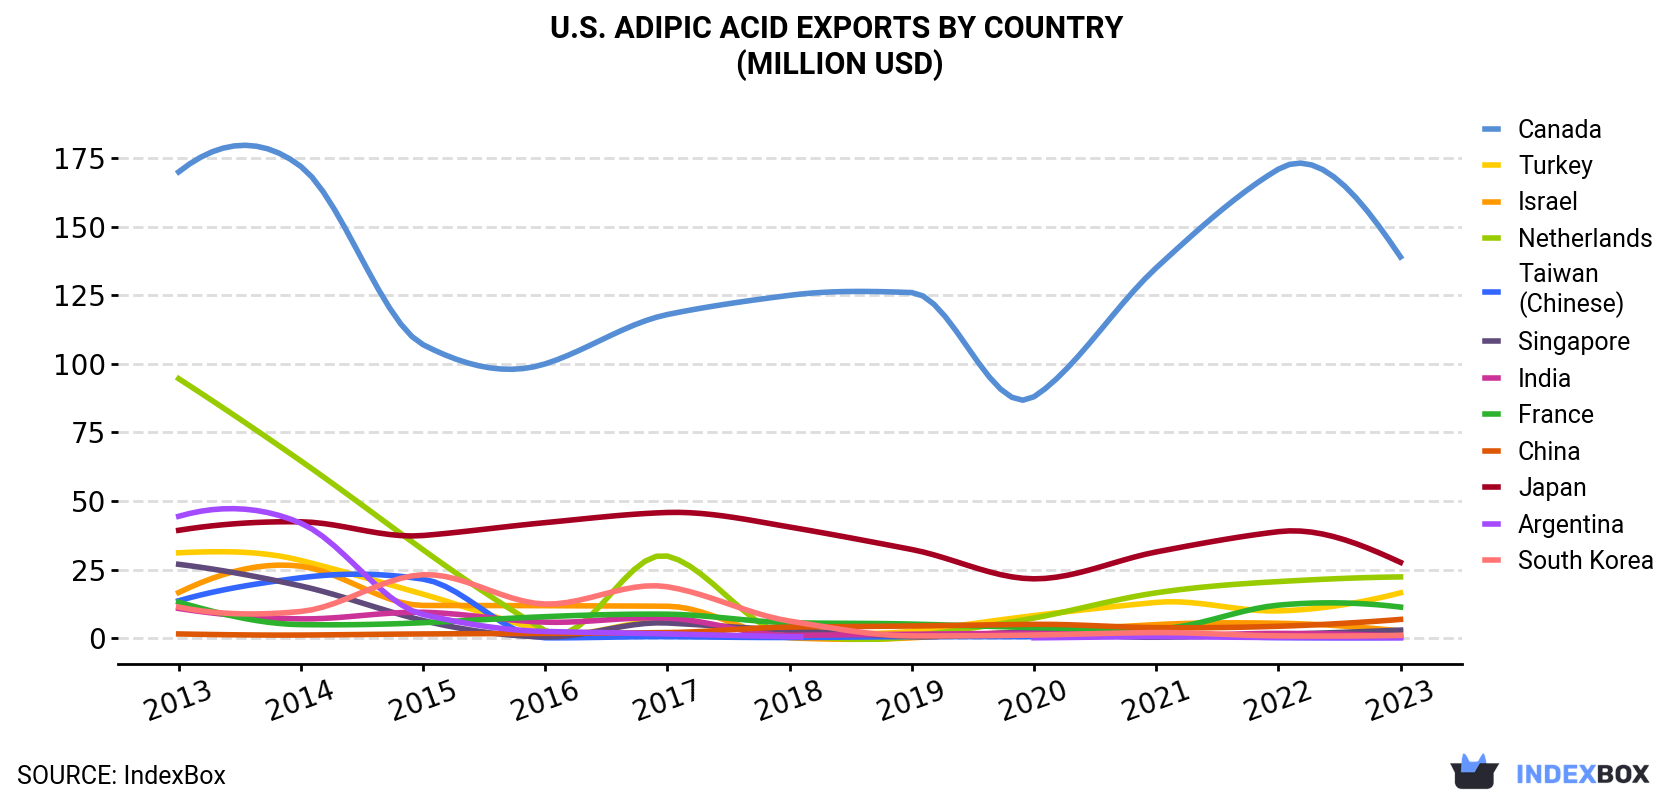 U.S. Adipic Acid Exports By Country (Million USD)